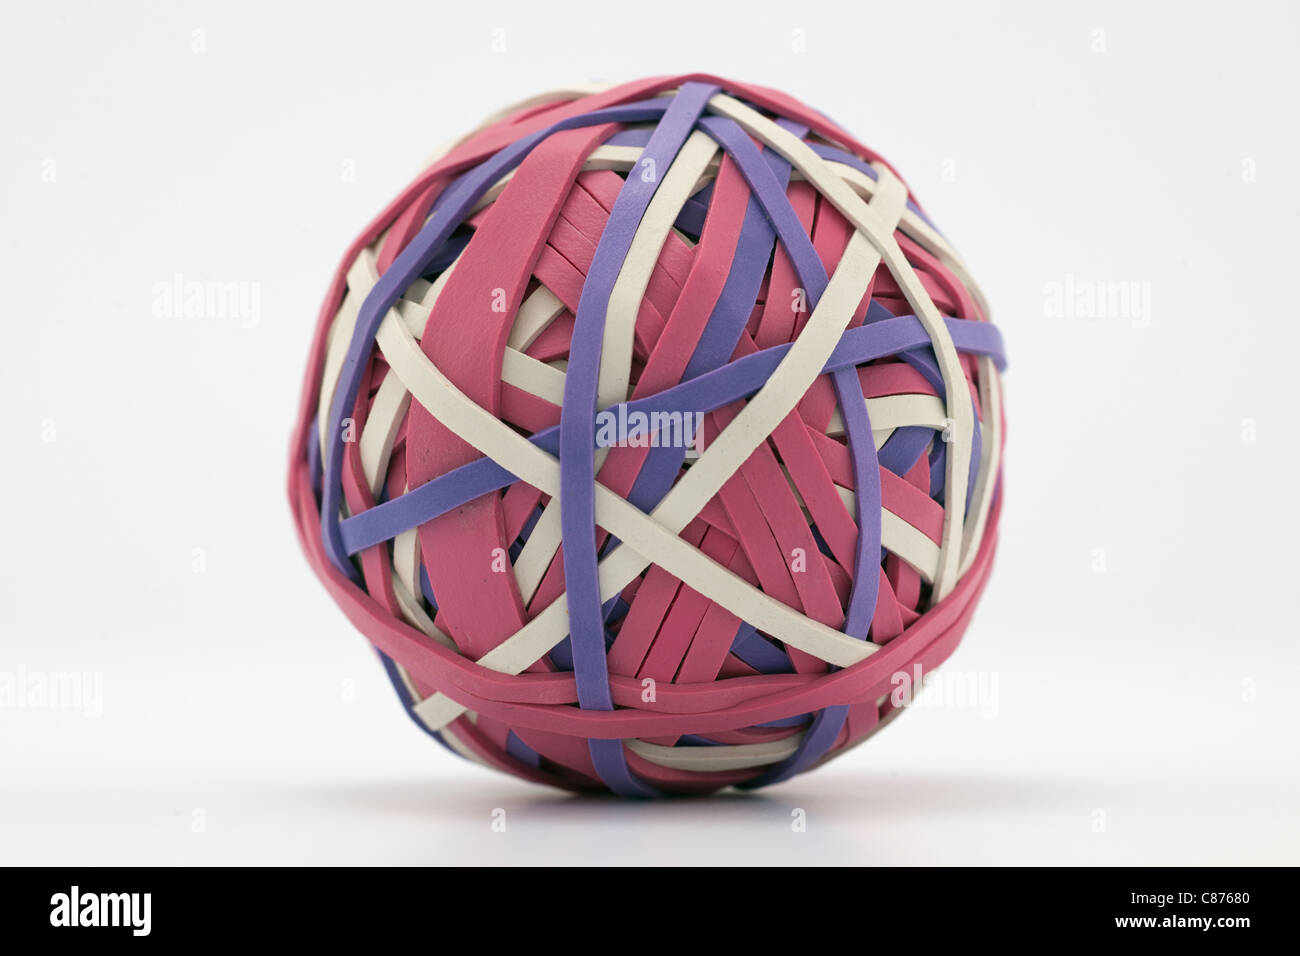 Rubber ball made from strips of elastic Stock Photo